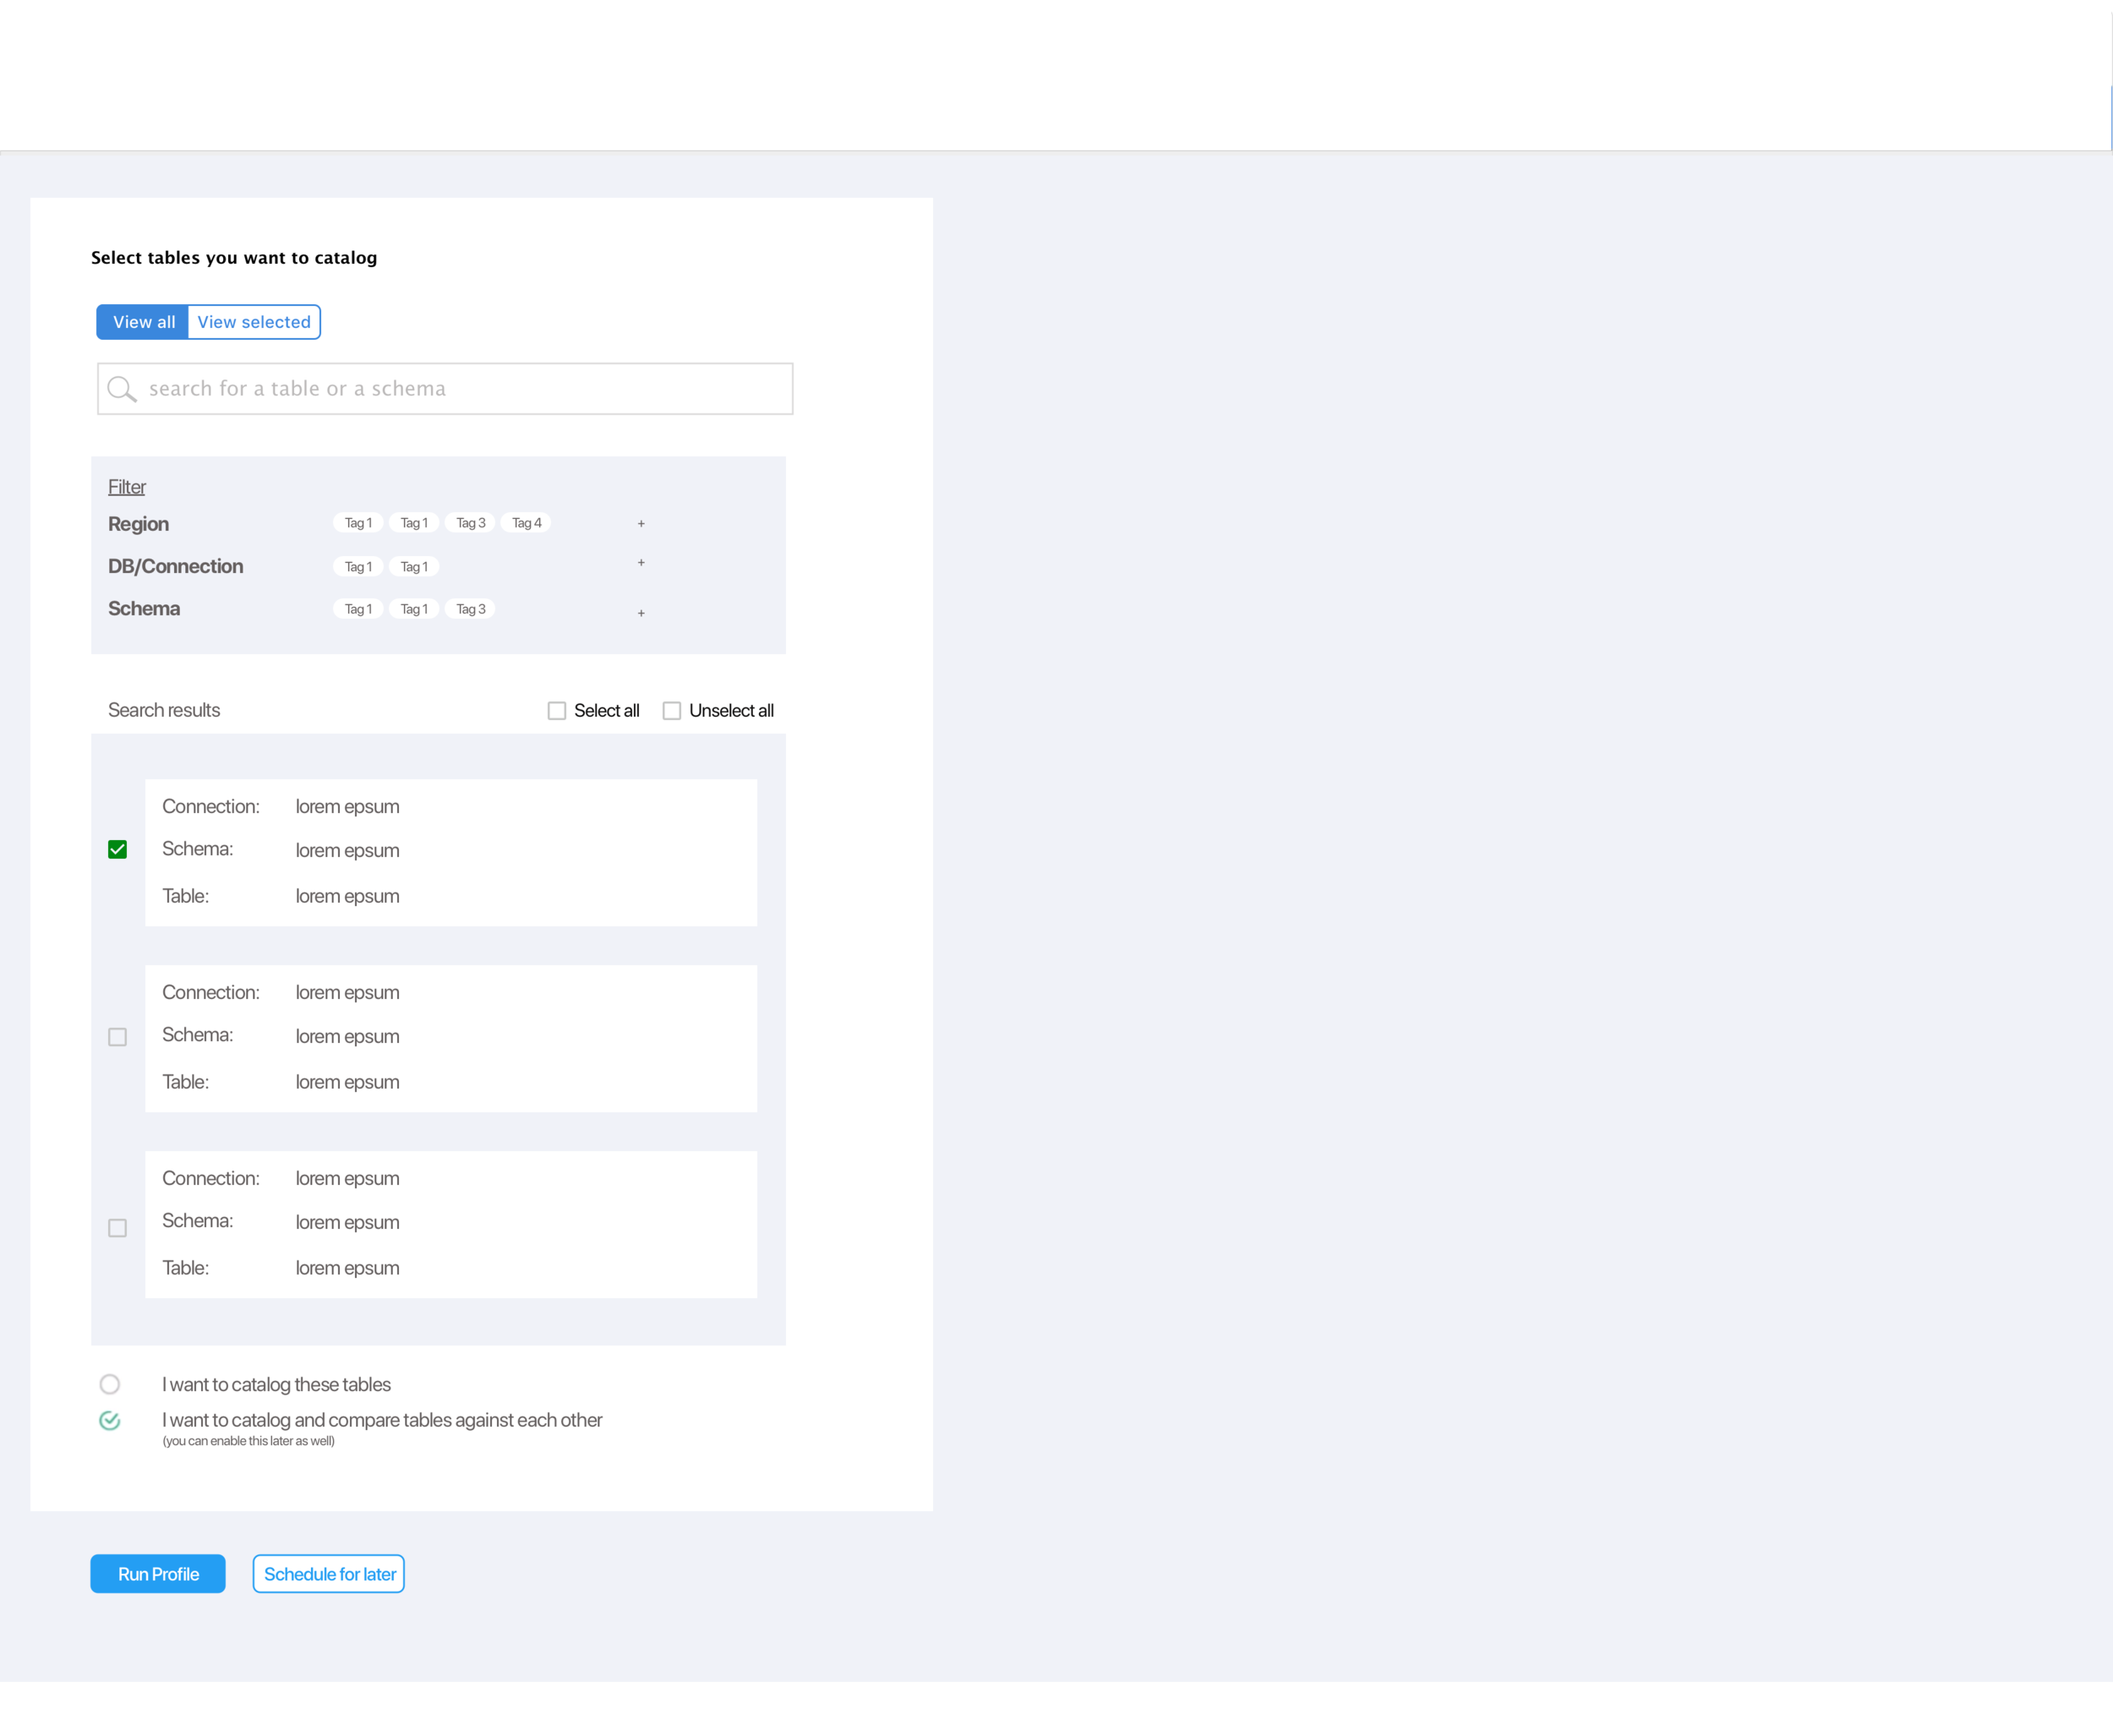 This ideal-state concept helps our clients imagine a hassle free UX which allows users to focus on datasets and tables while it automates all intermediate tasks.   